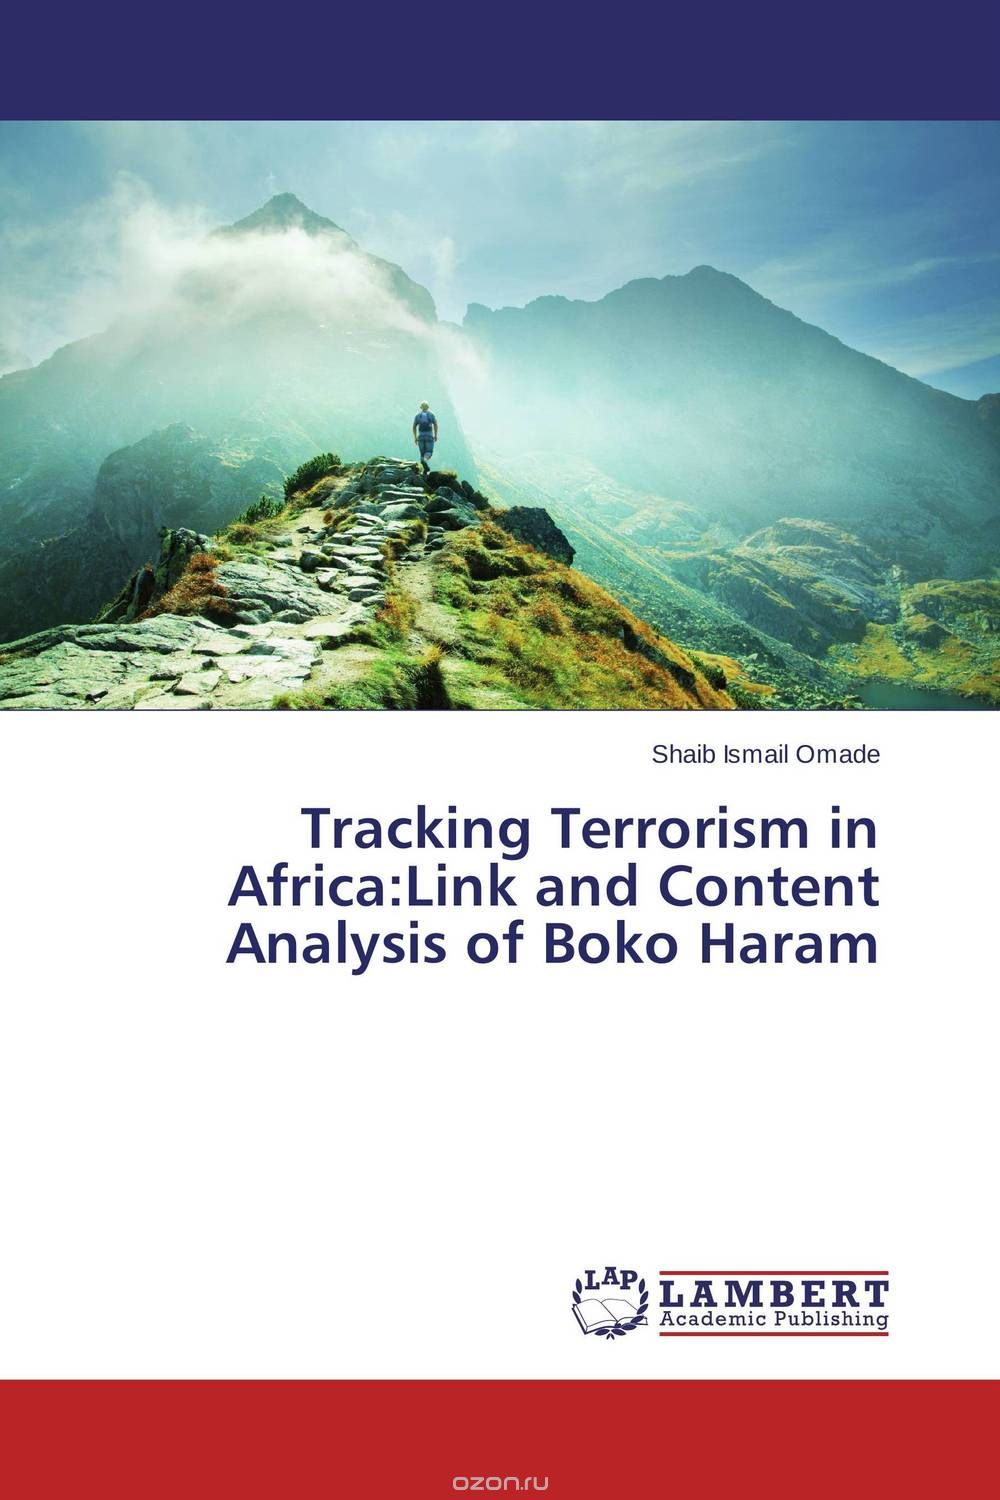 Tracking Terrorism in Africa:Link and Content Analysis of Boko Haram